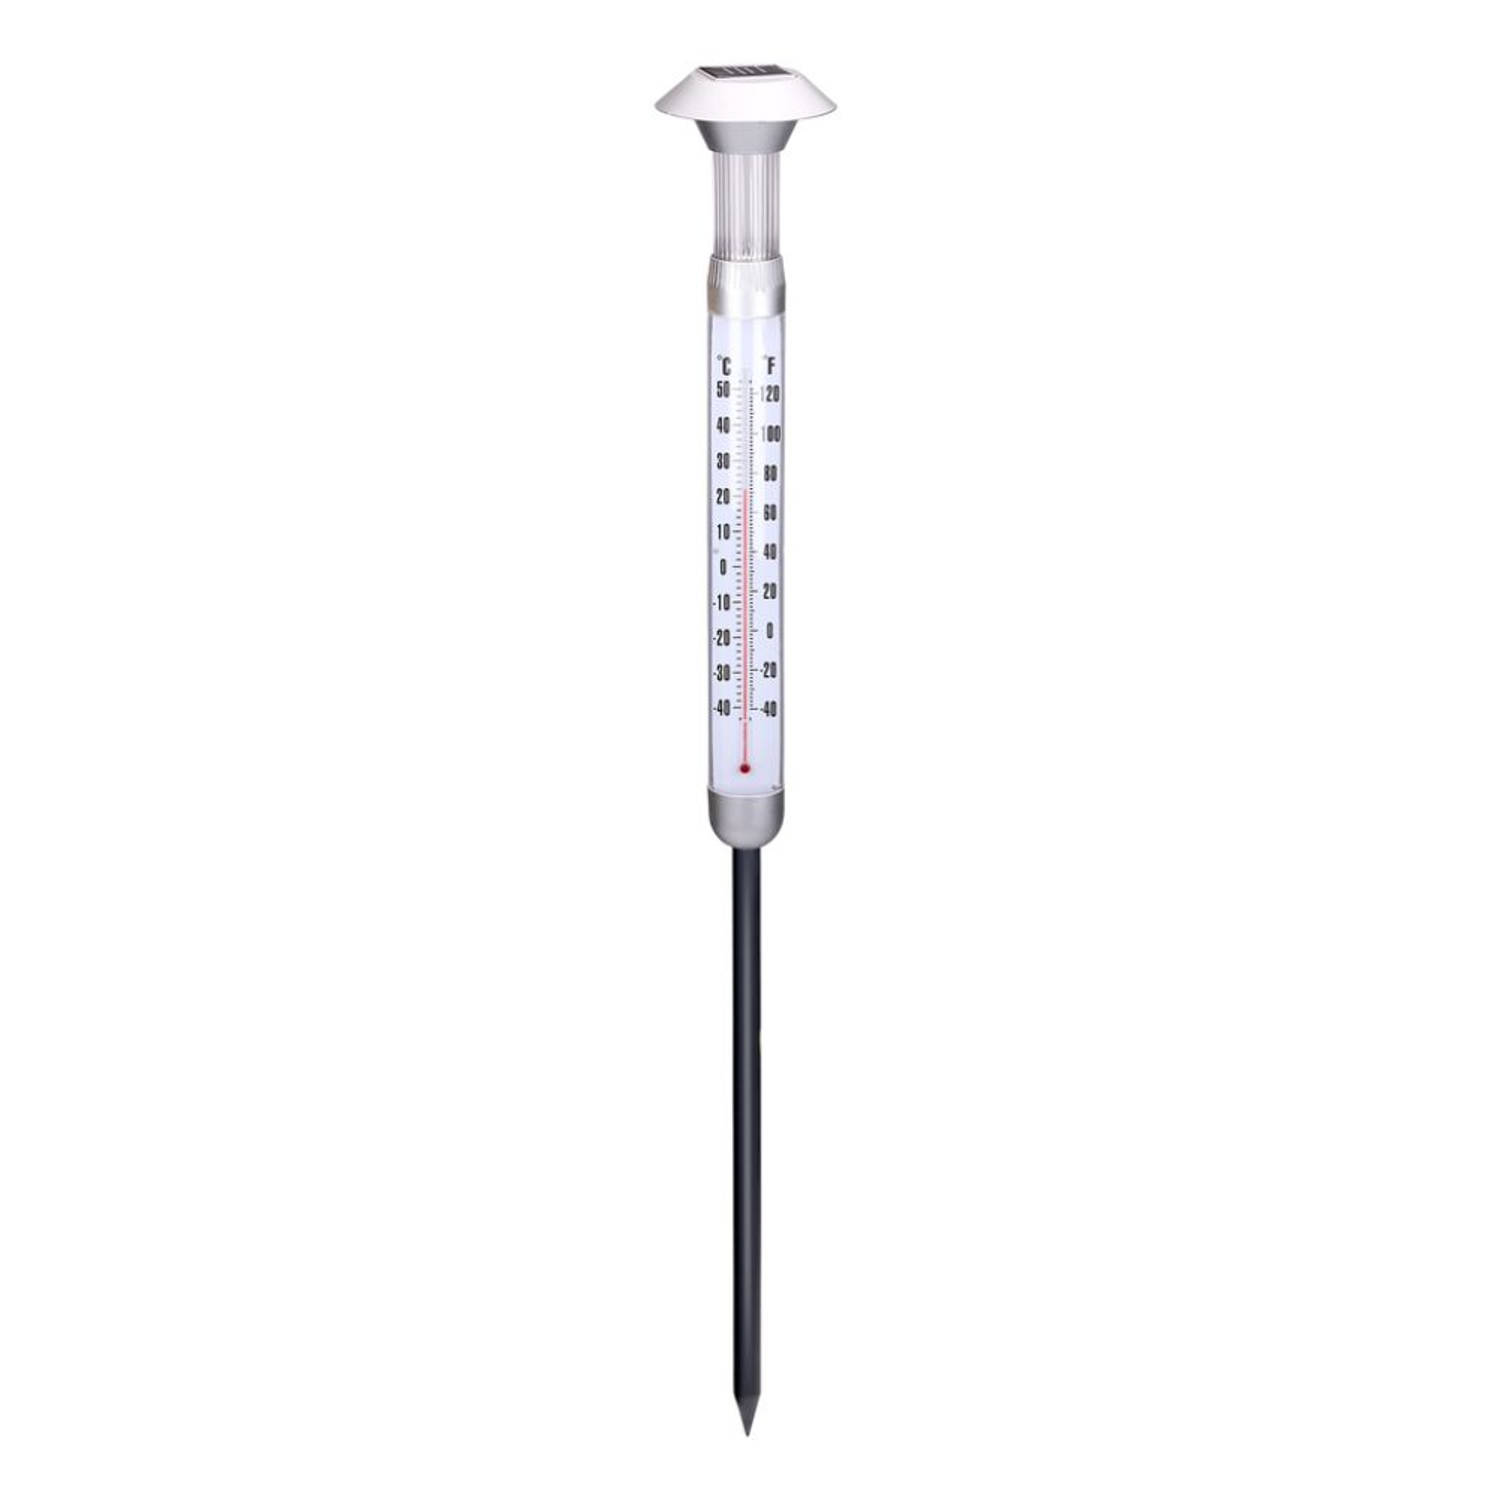 Solar LED lamp met thermometer